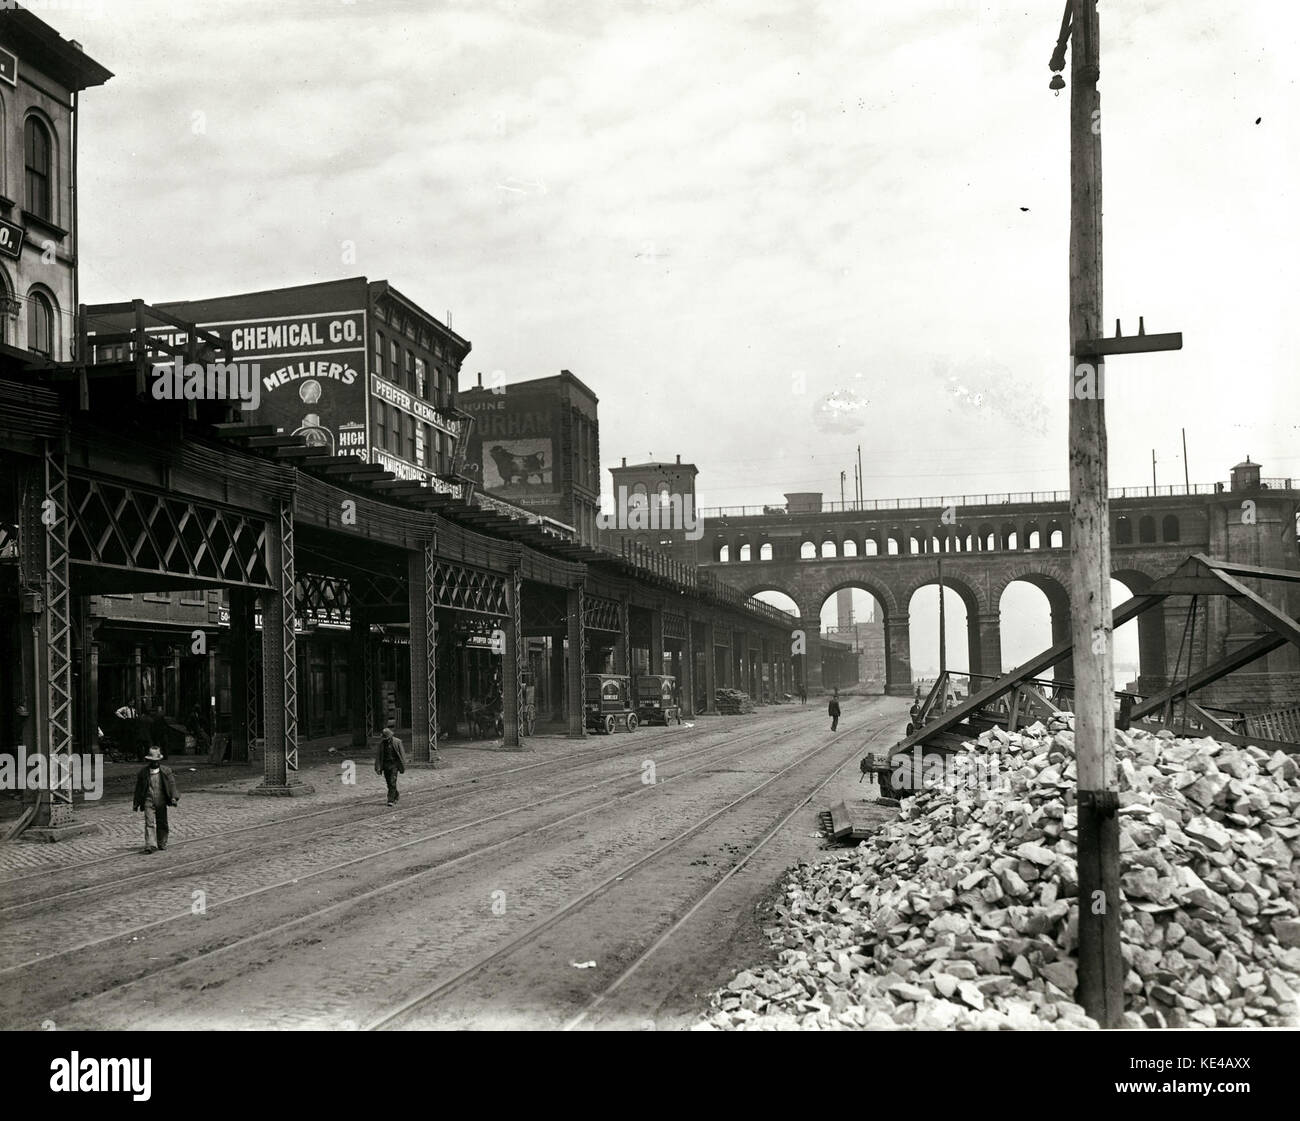 Wharf Street nach Norden in Richtung Pfeiffer Chemical Company in 500 North Commercial Street. Eads Bridge in der Ferne Stockfoto